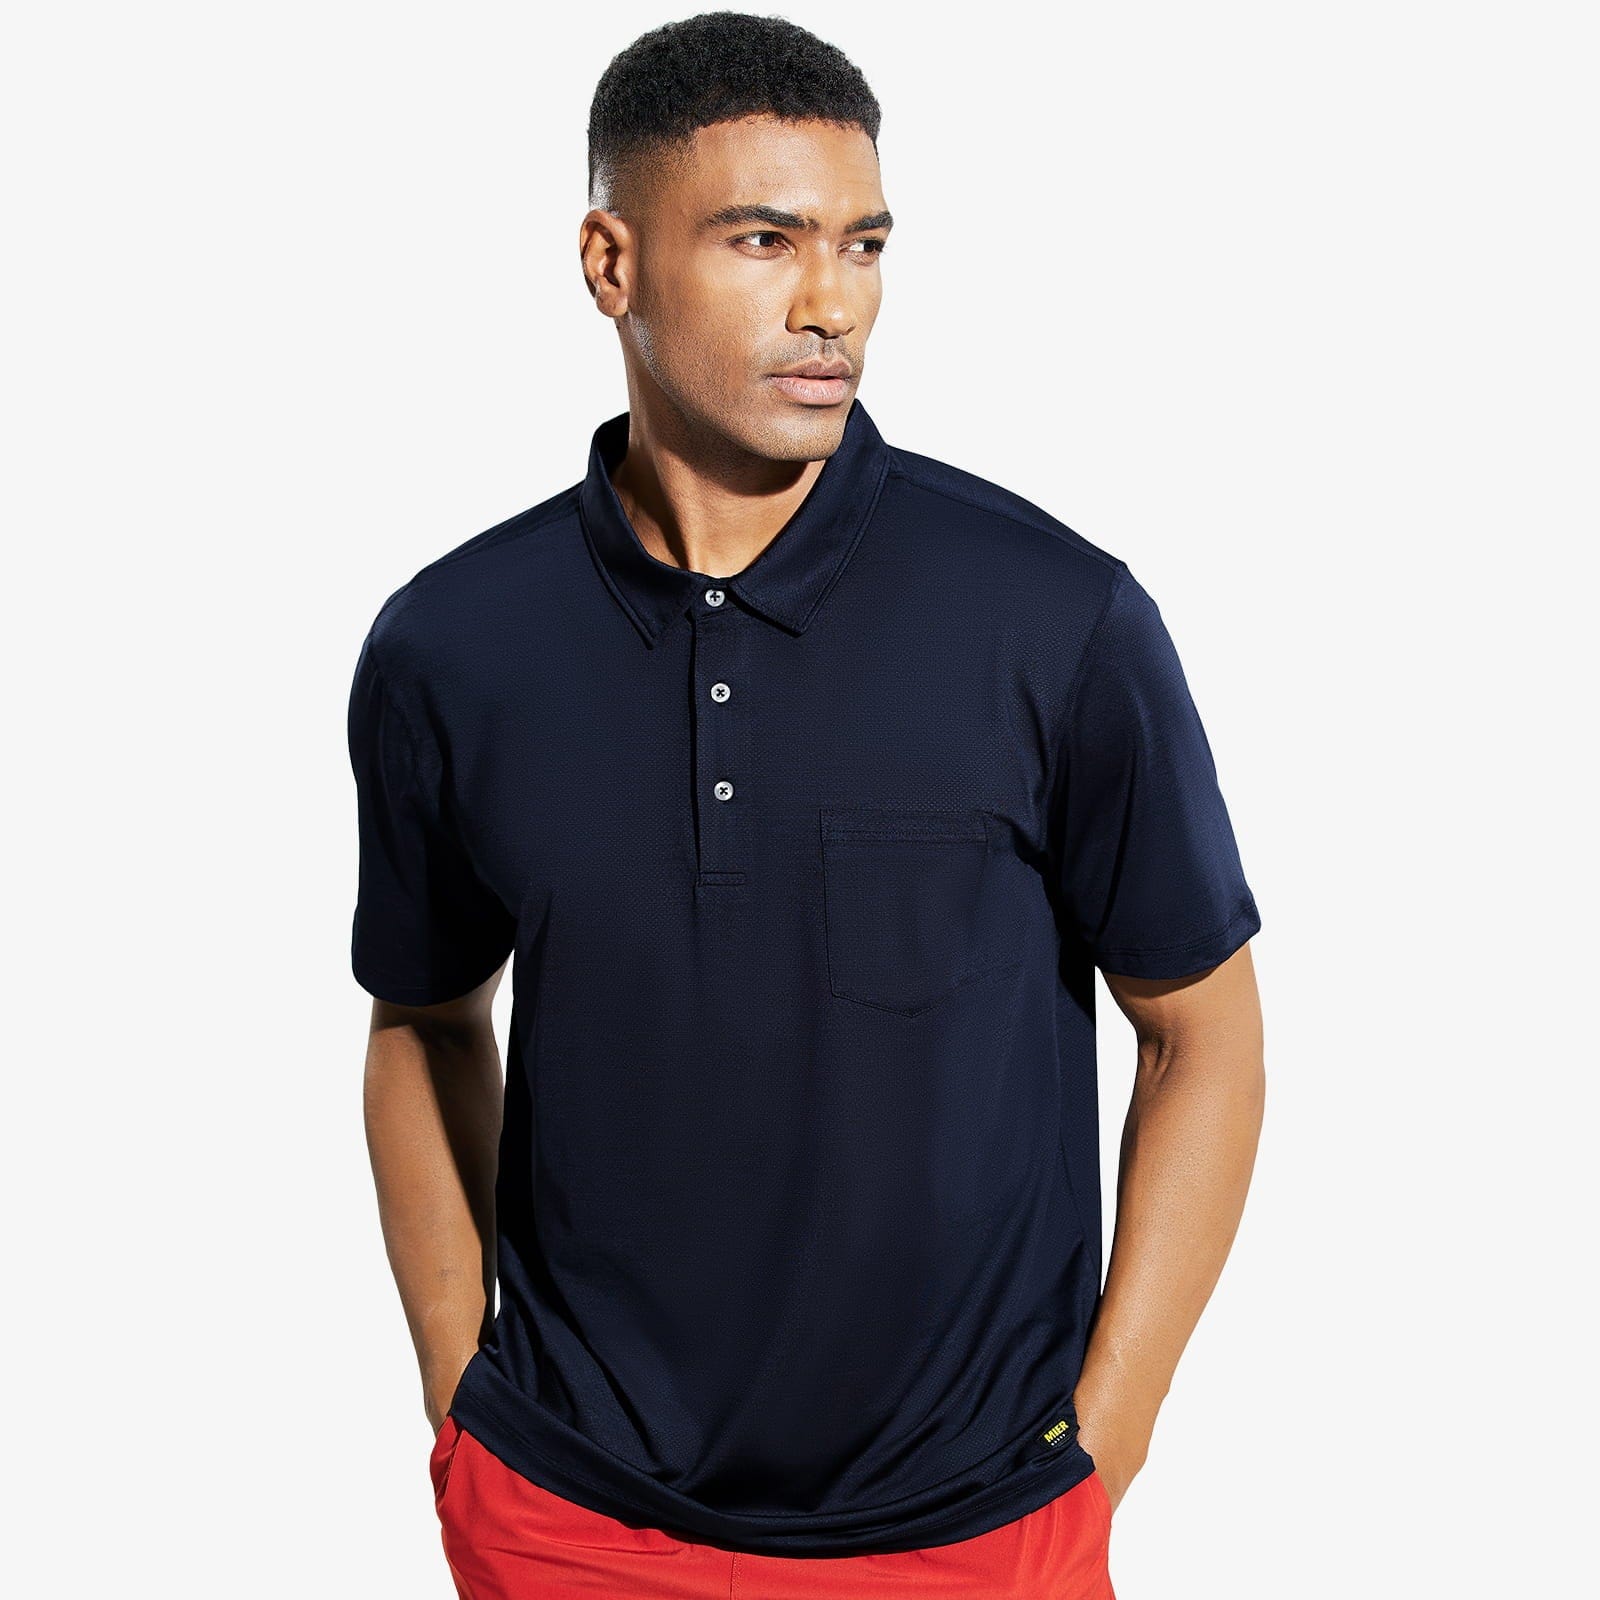 Men's Dry Fit Golf Polo Shirts Collared Shirt with Pocket Men Polo Dark Blue / S MIER